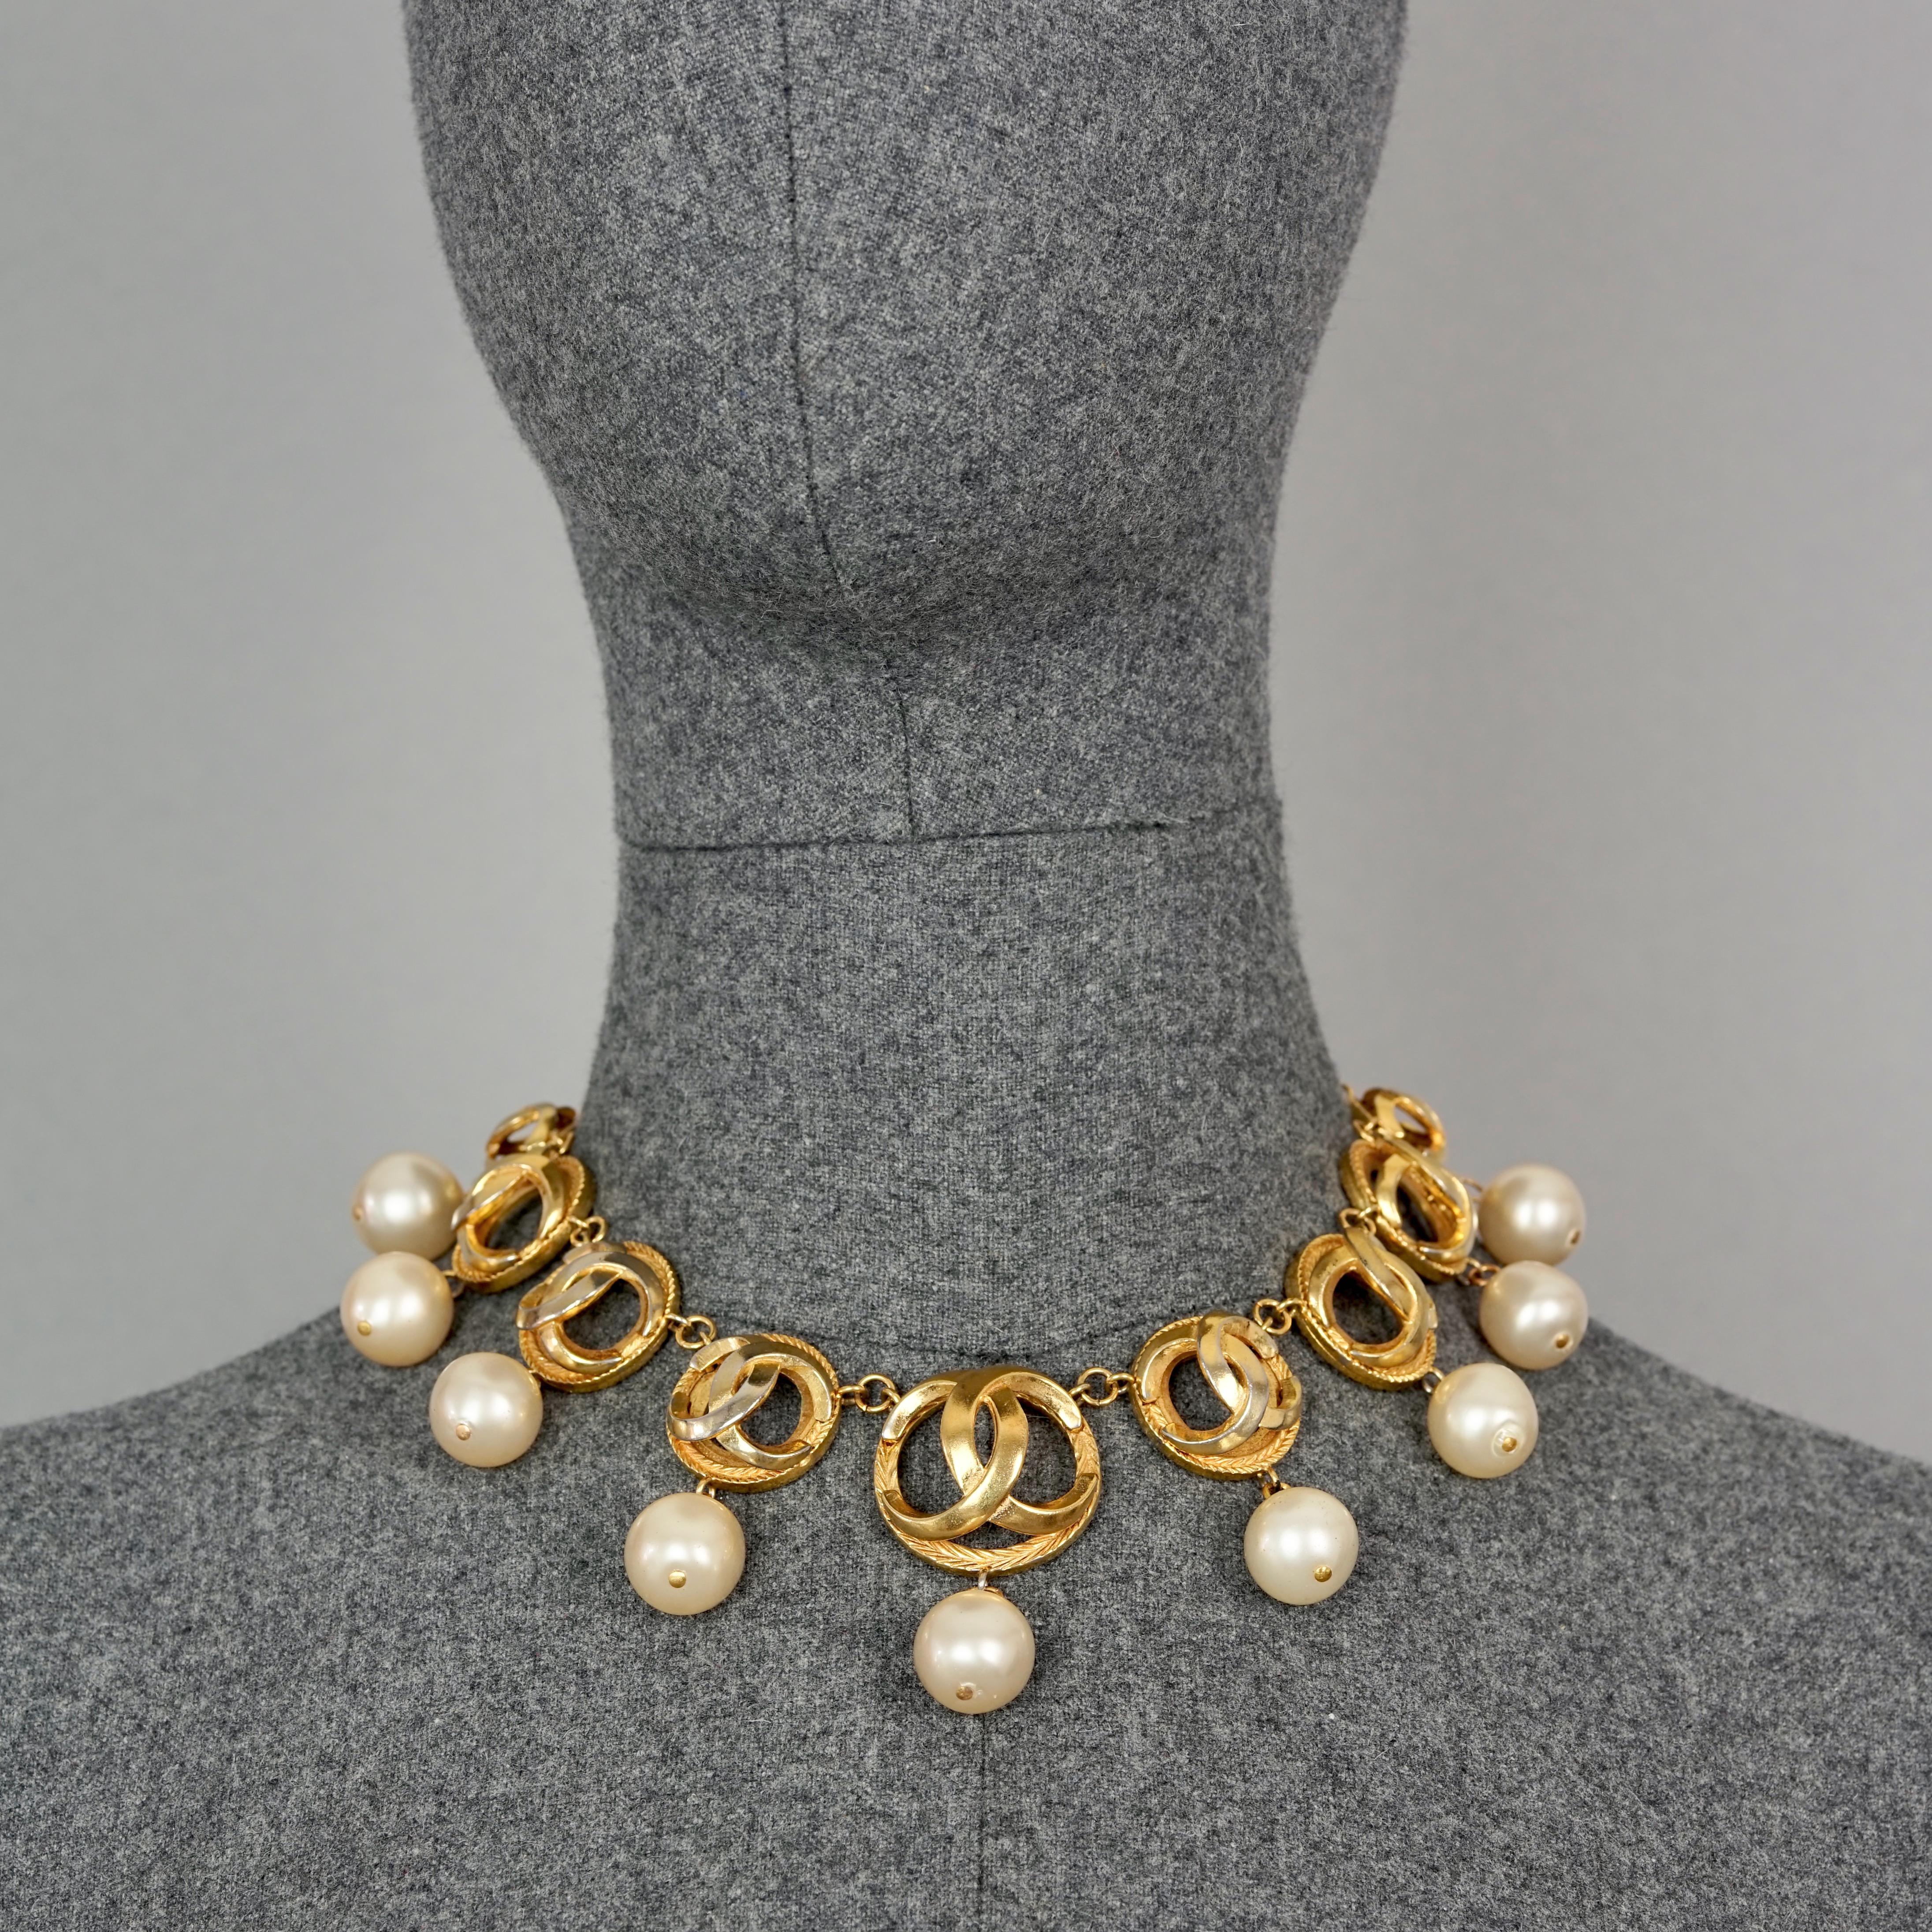 Vintage CHANEL CC Logo Links Pearl Charms Necklace

Measurements:
Height: 2.16 inches  (5.5 cm)
Wearable Length: 14.76 inches (37.5 cm)

Features: 
- 100% Authentic CHANEL.
- Iconic CHANEL CC logo links with glass pearl charms.
- Signed CHANEL CC